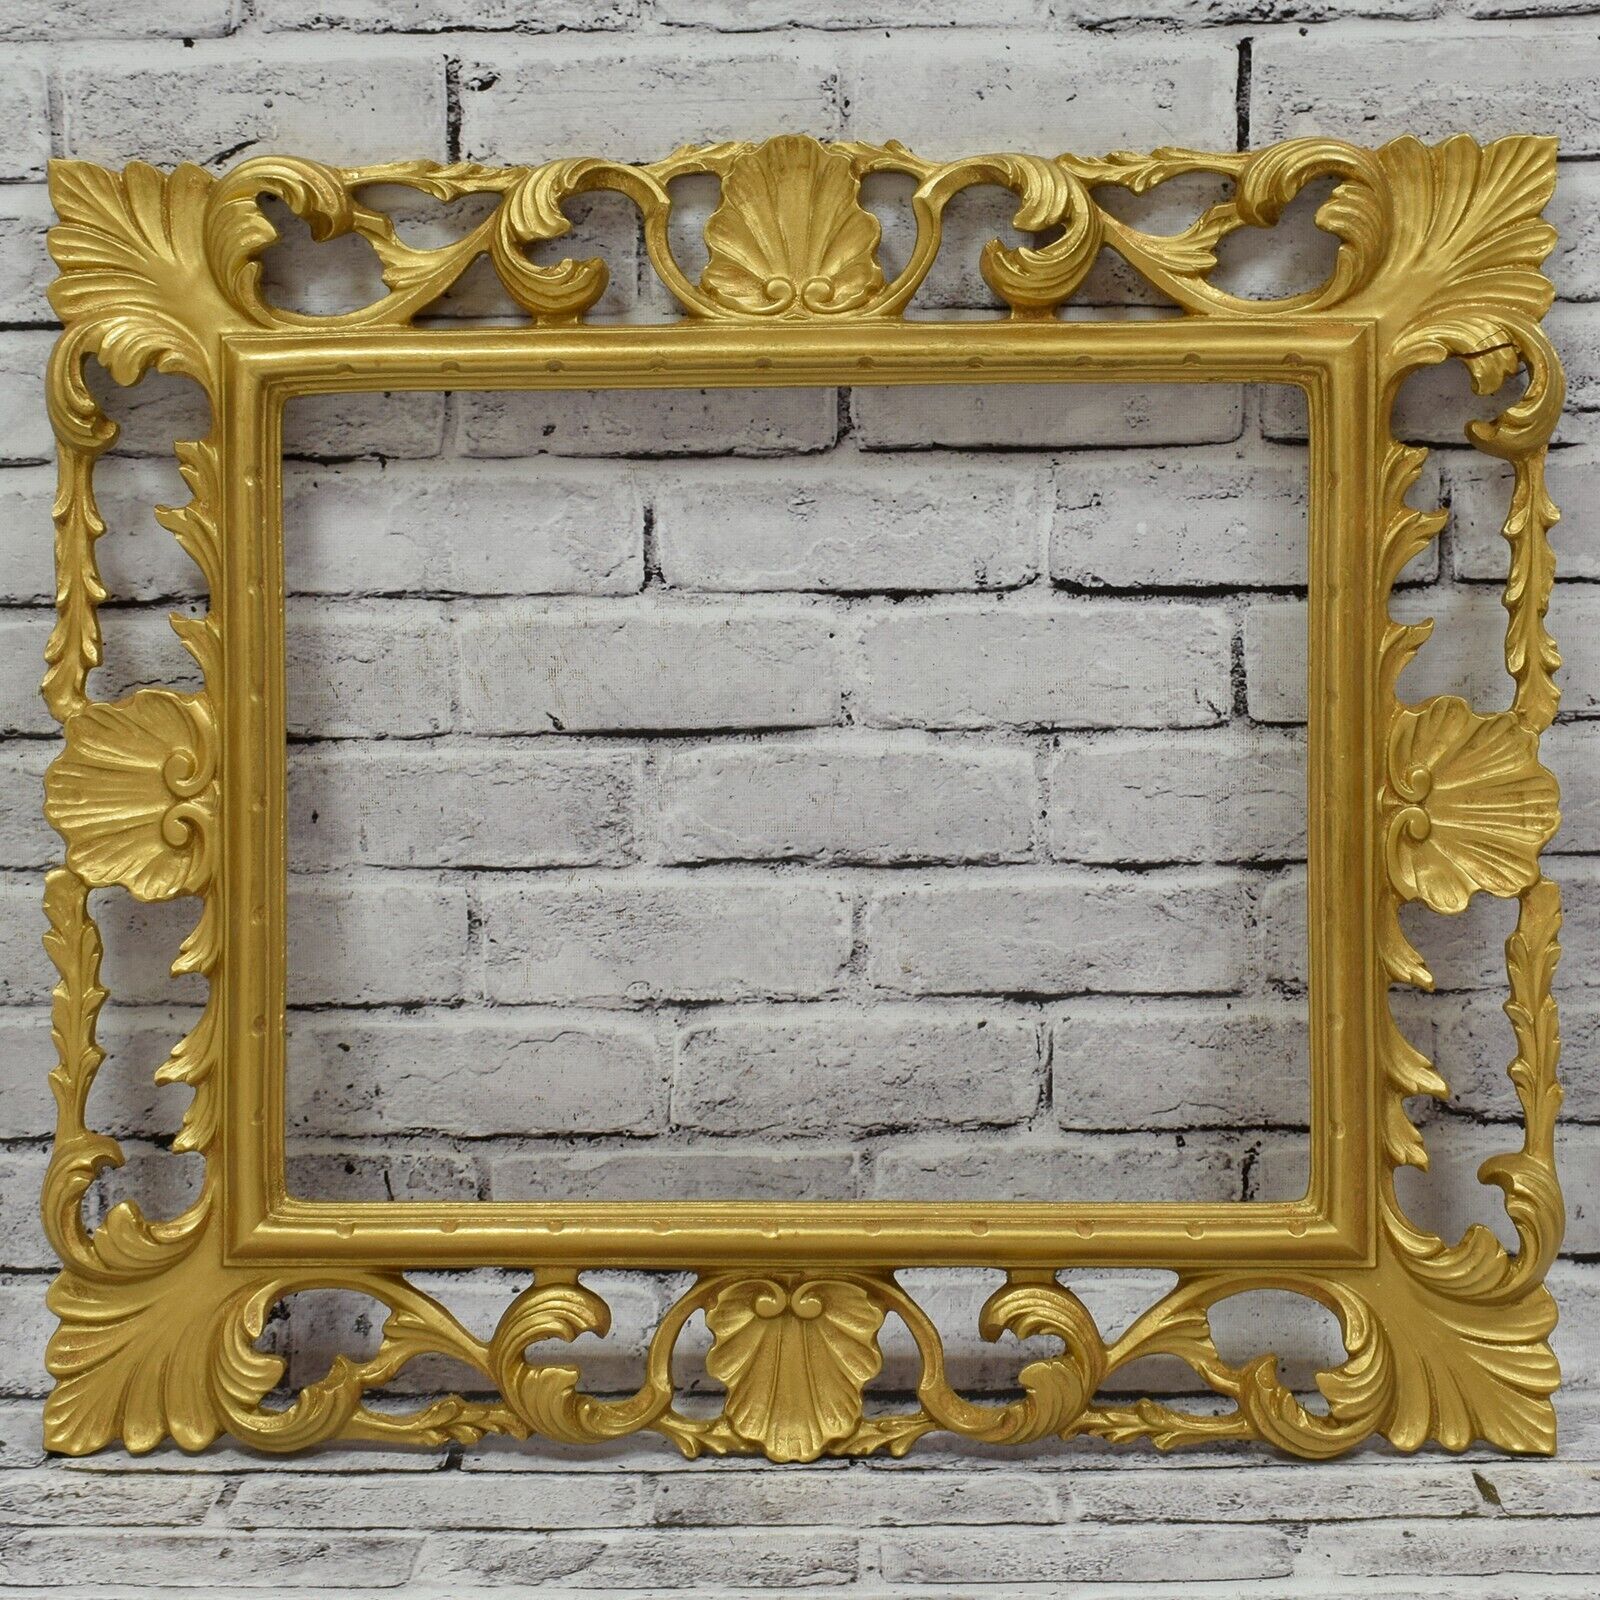 Old wooden decorative frame golden coloured dimensions: 18.7 x 15 in